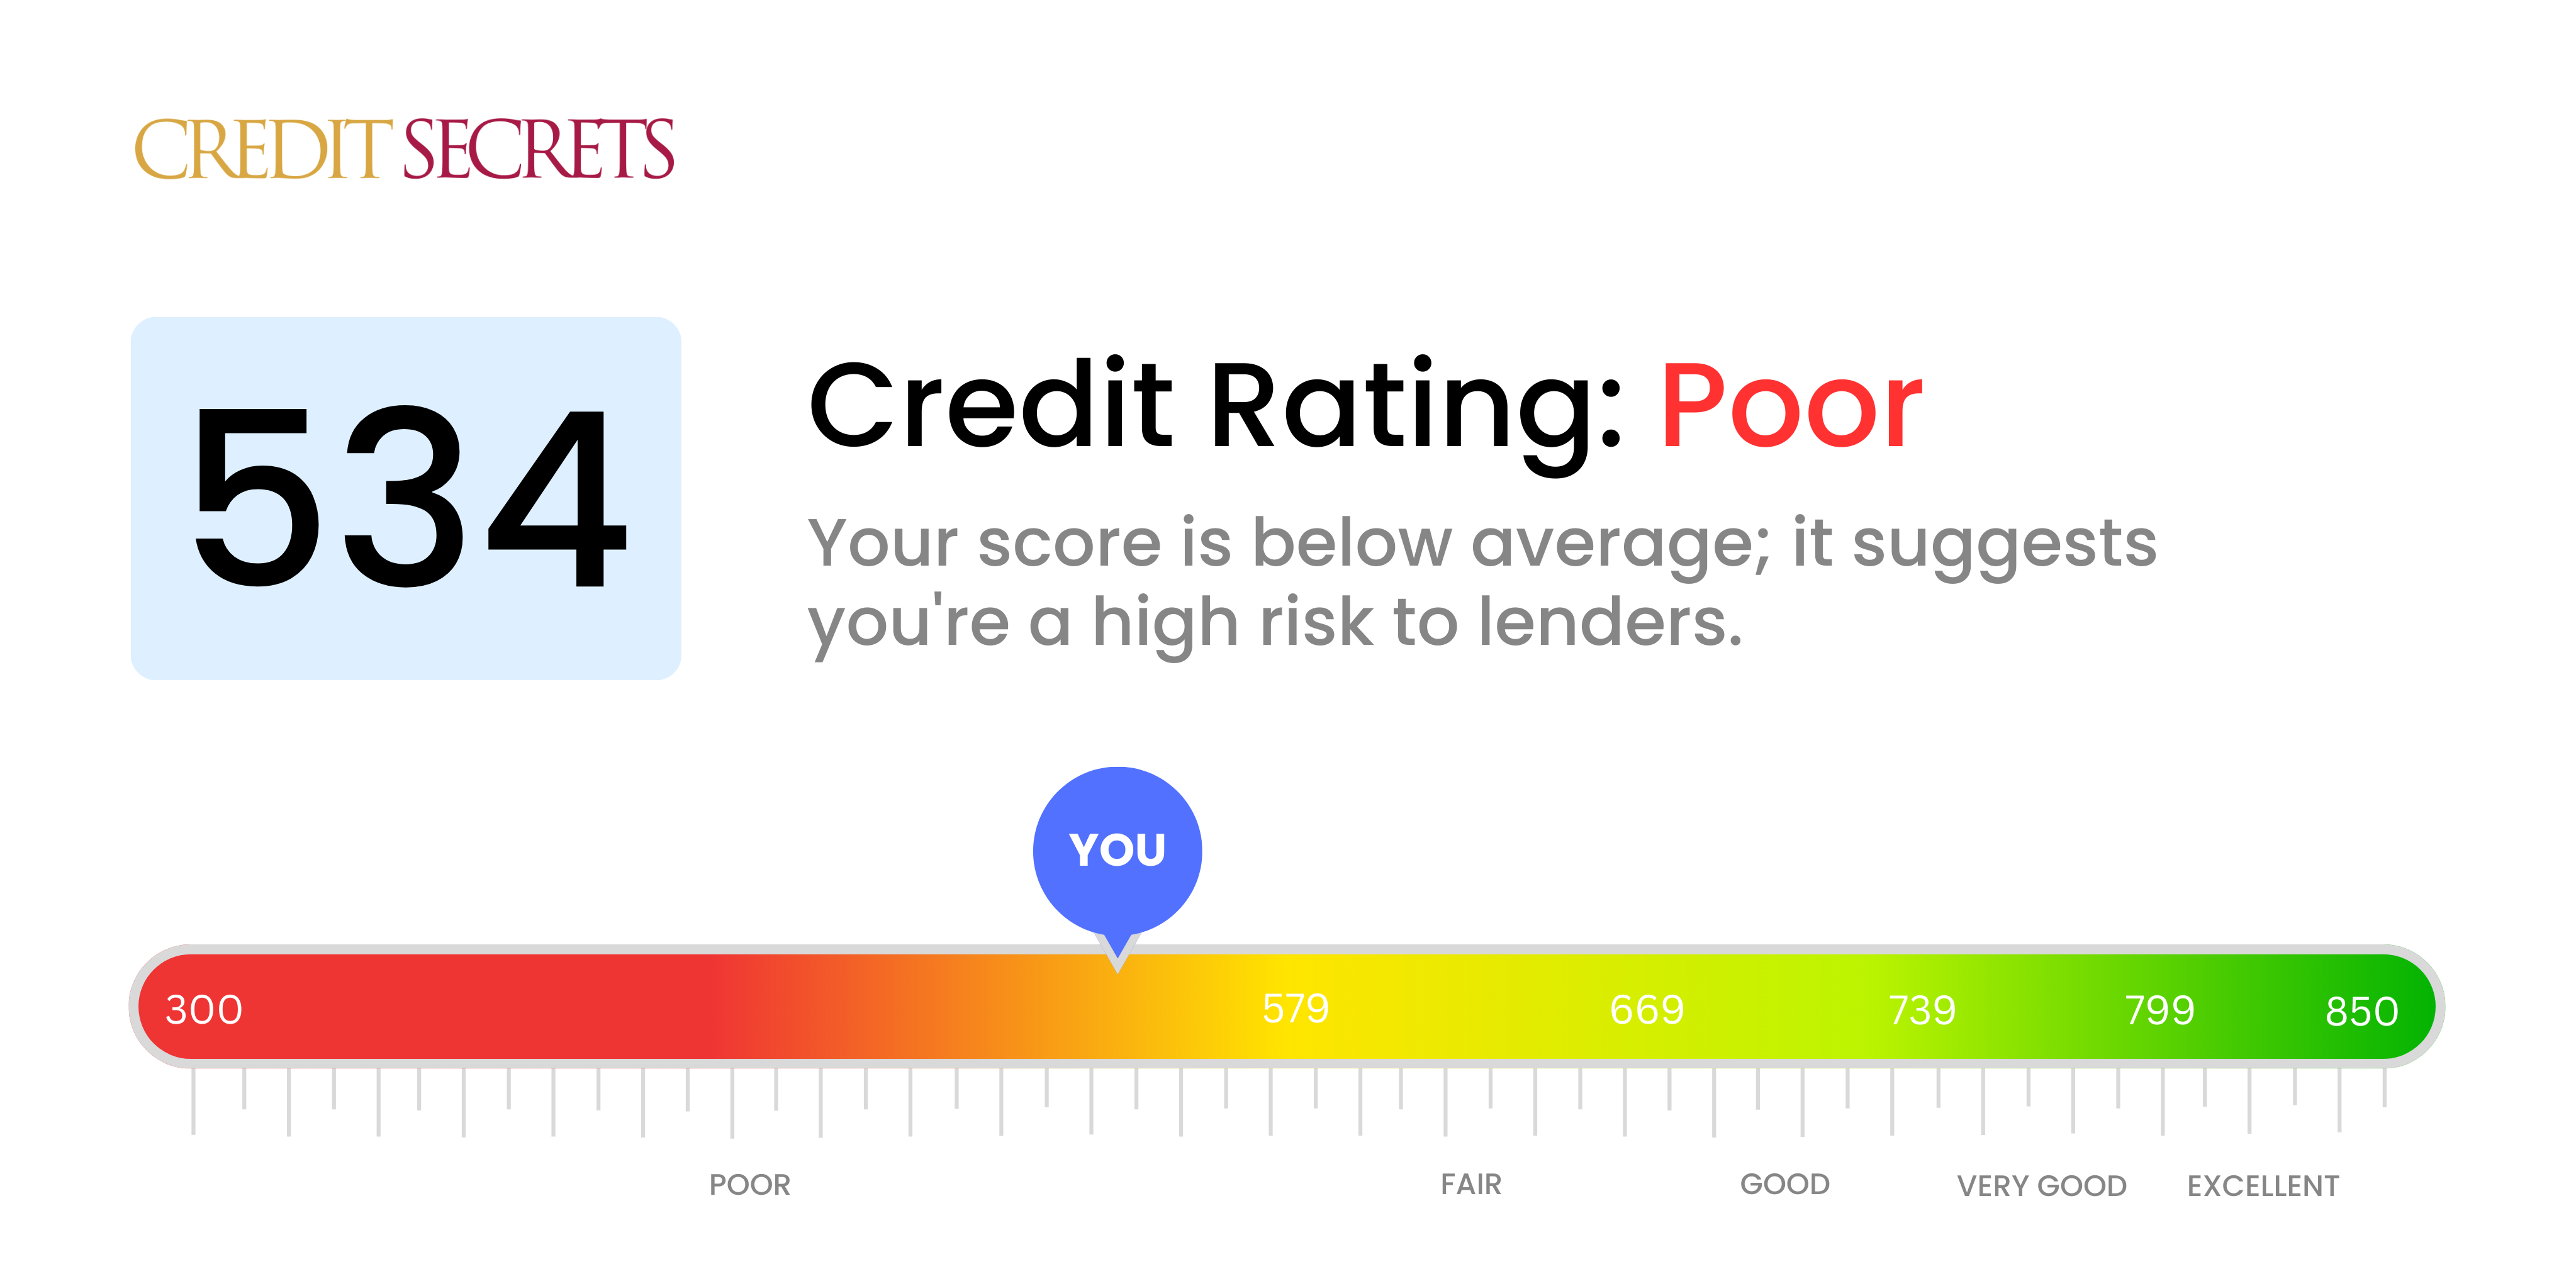 Is 534 a good credit score?